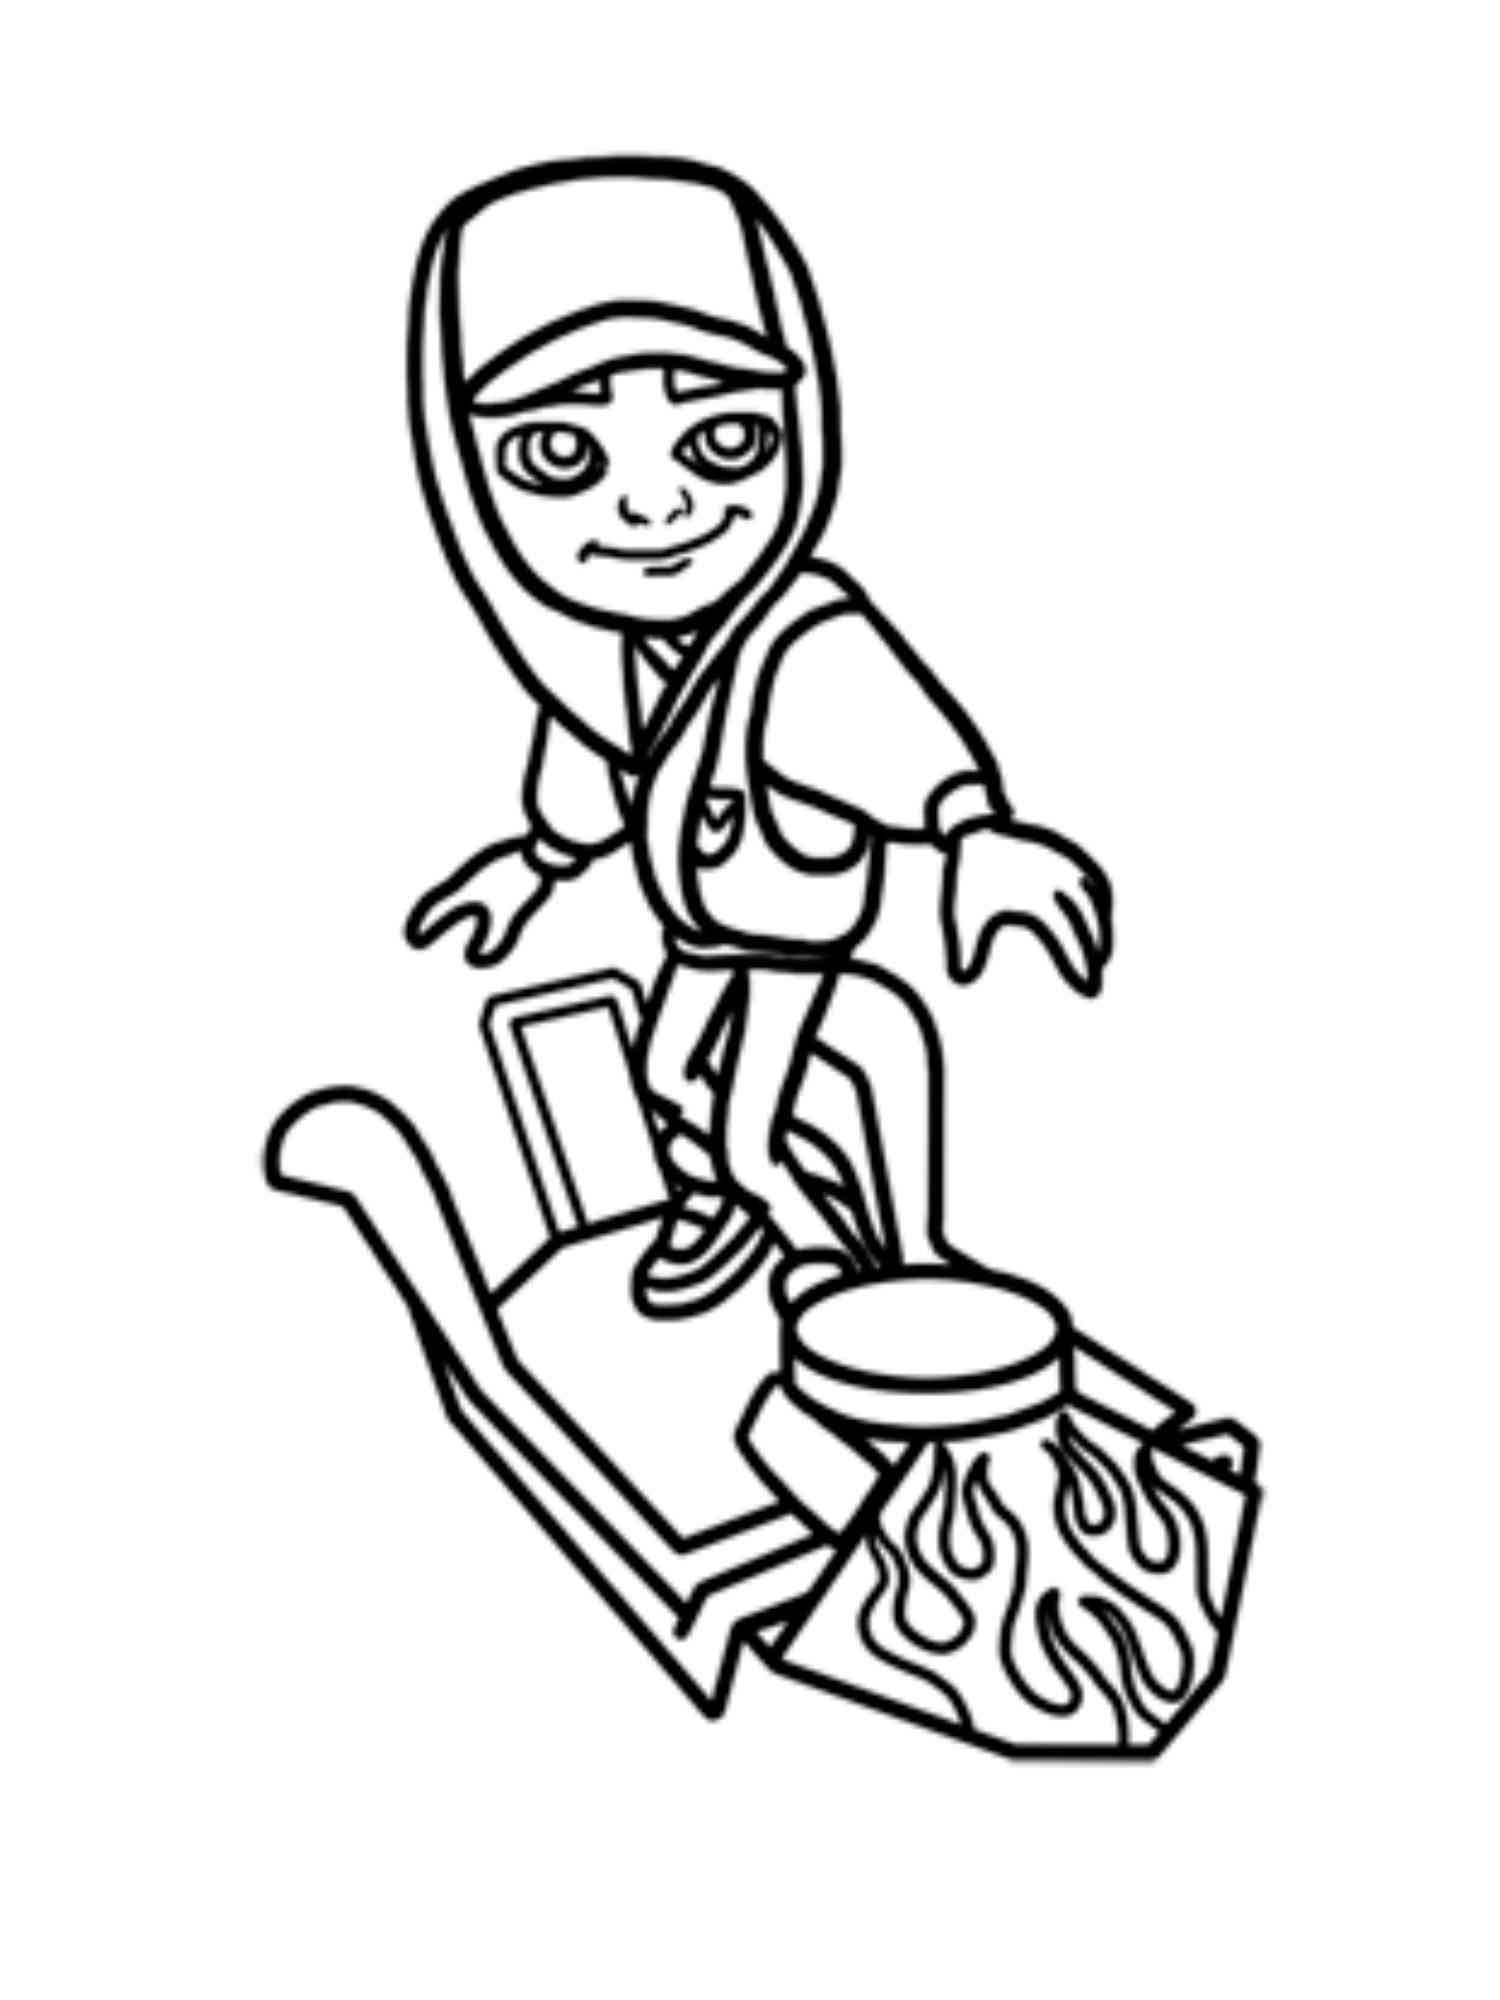 Cute Jake Subway Surfers coloring page